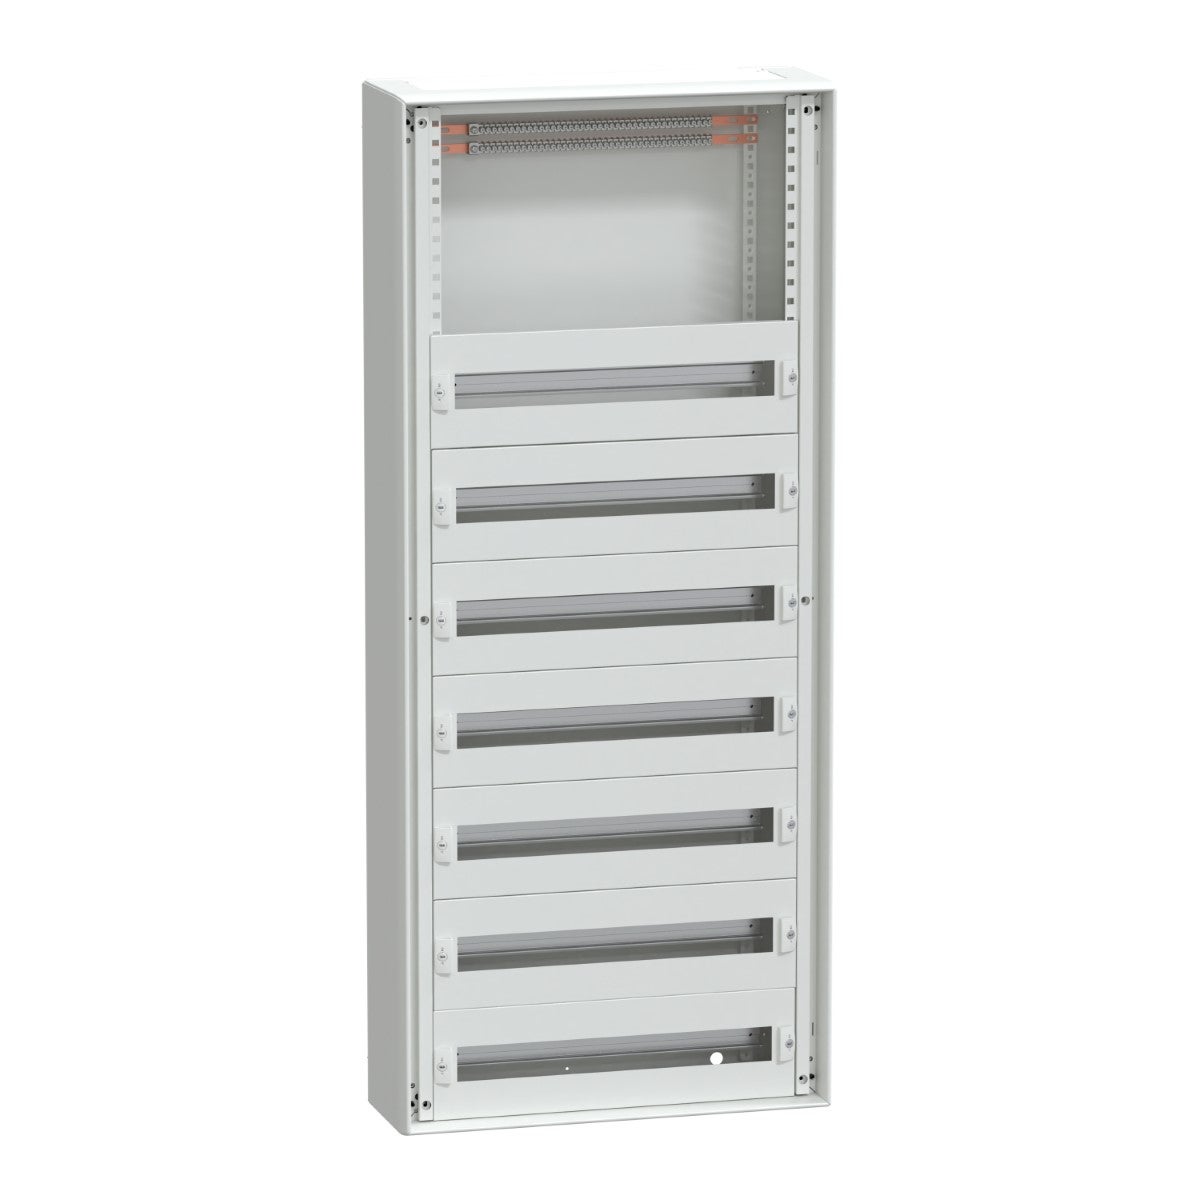 Enclosure, PrismaSeT G, for modular devices, wall mounted, W600mm, H1380mm (7R + incomer), IP30, with front plates, Pack 250